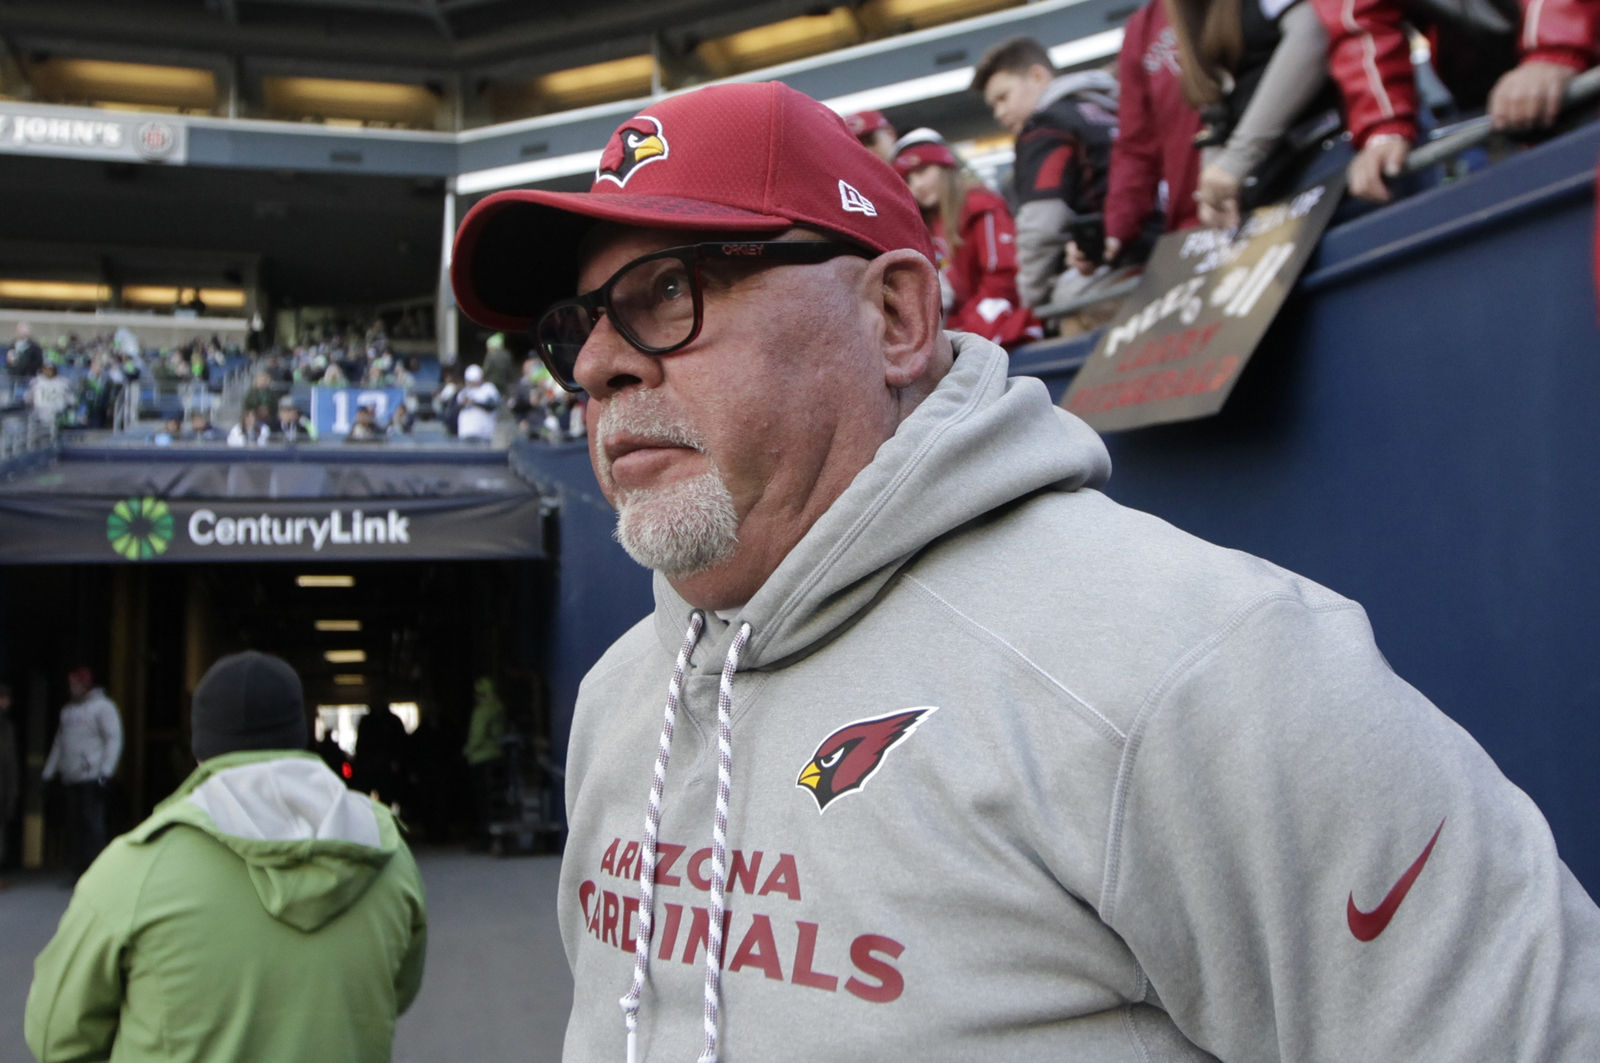 Arizona Cardinals head coach Bruce Arians looks out to the field before an NFL football game against the Seattle Seahawks, Sunday, Dec. 31, 2017, in Seattle. (AP Photo/John Froschauer)